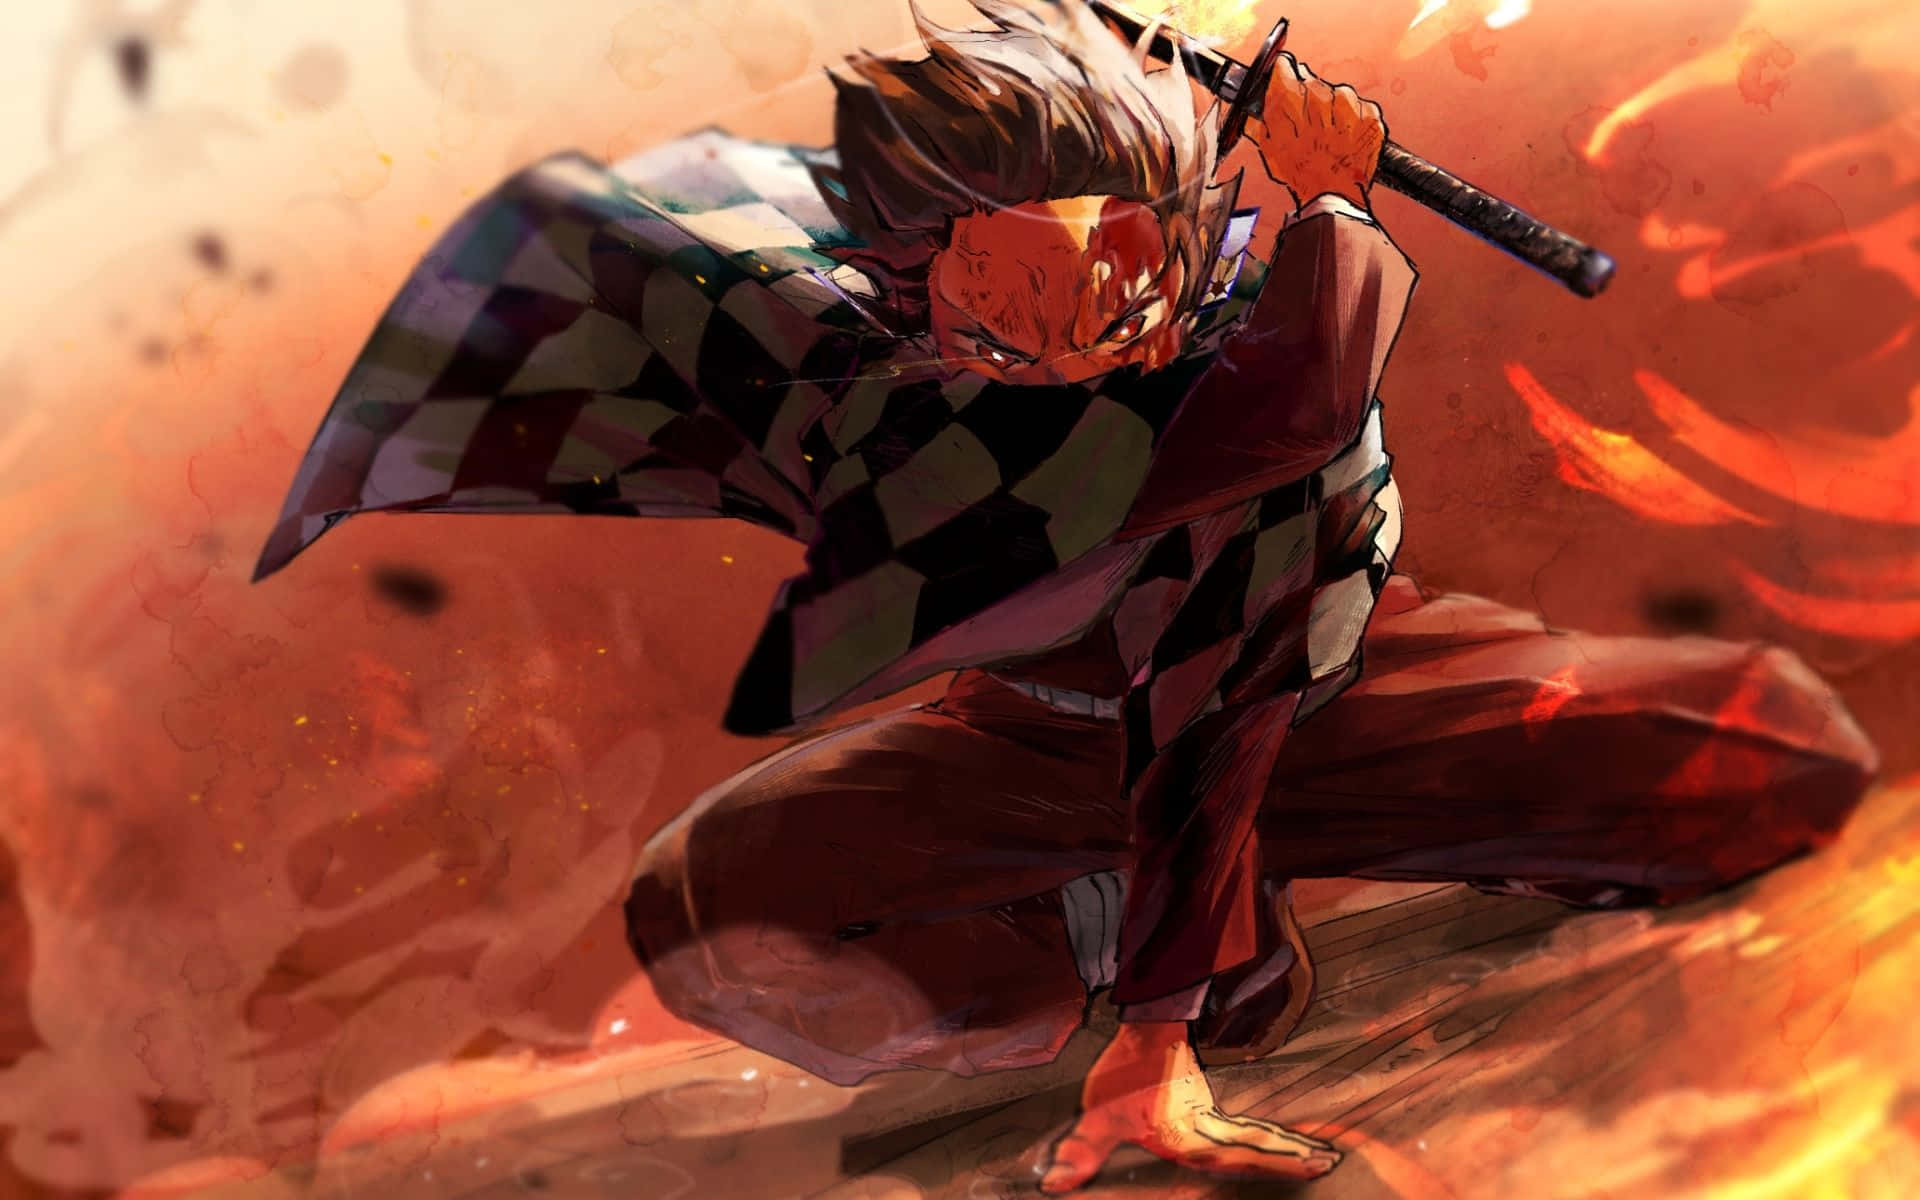 Image Unleash The Power Of Demon Slayer With This High-performance Laptop Wallpaper